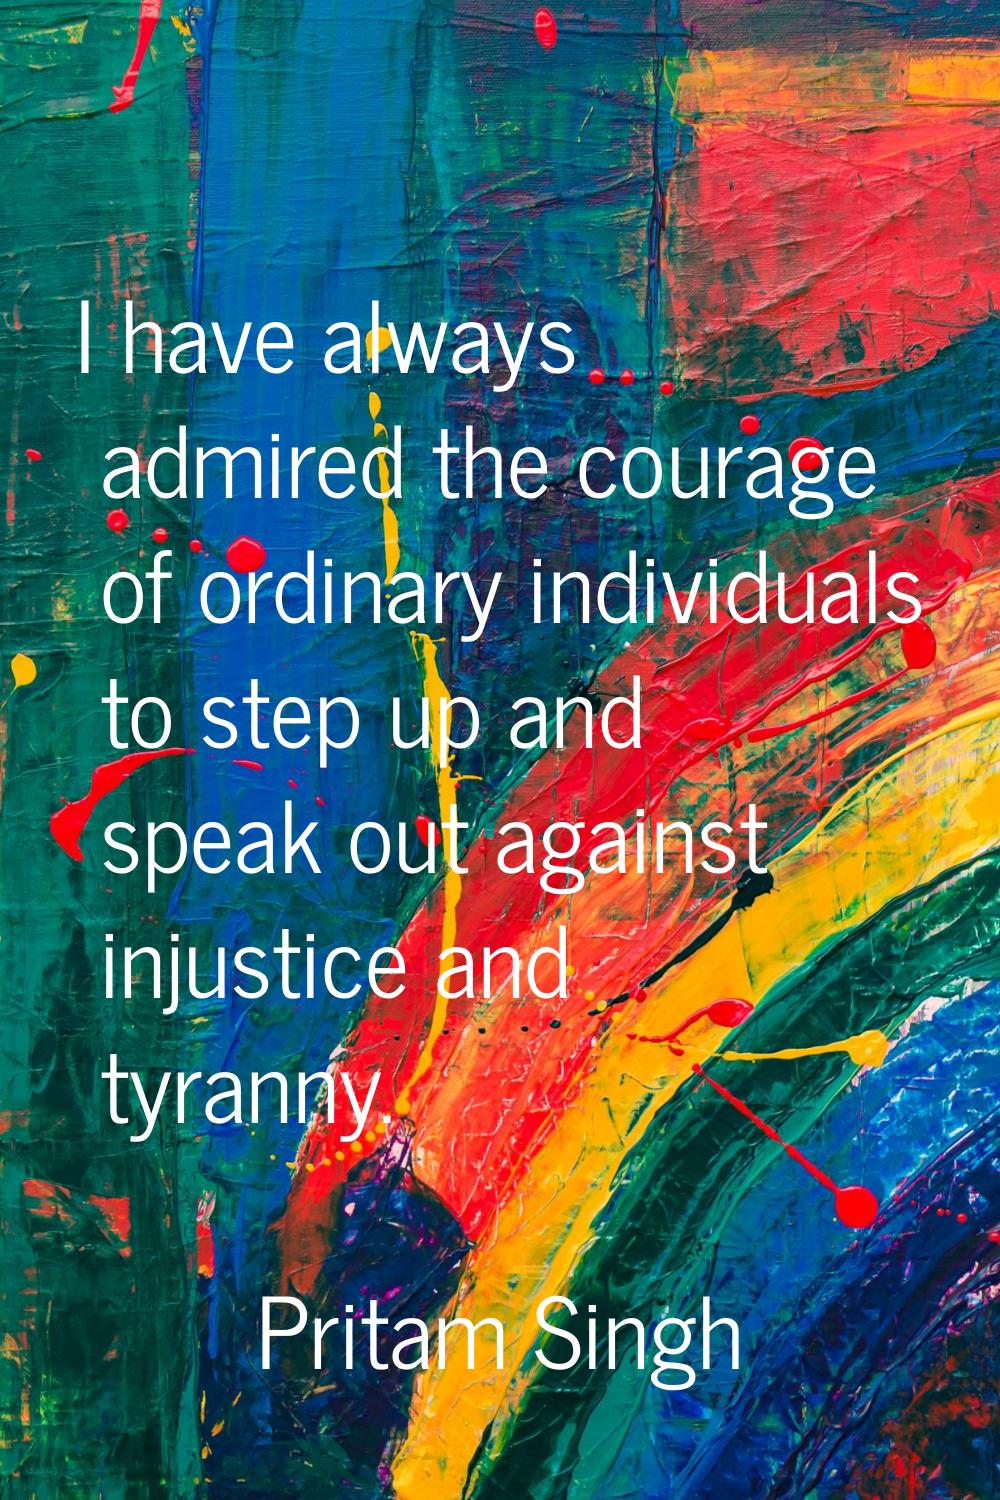 I have always admired the courage of ordinary individuals to step up and speak out against injustic